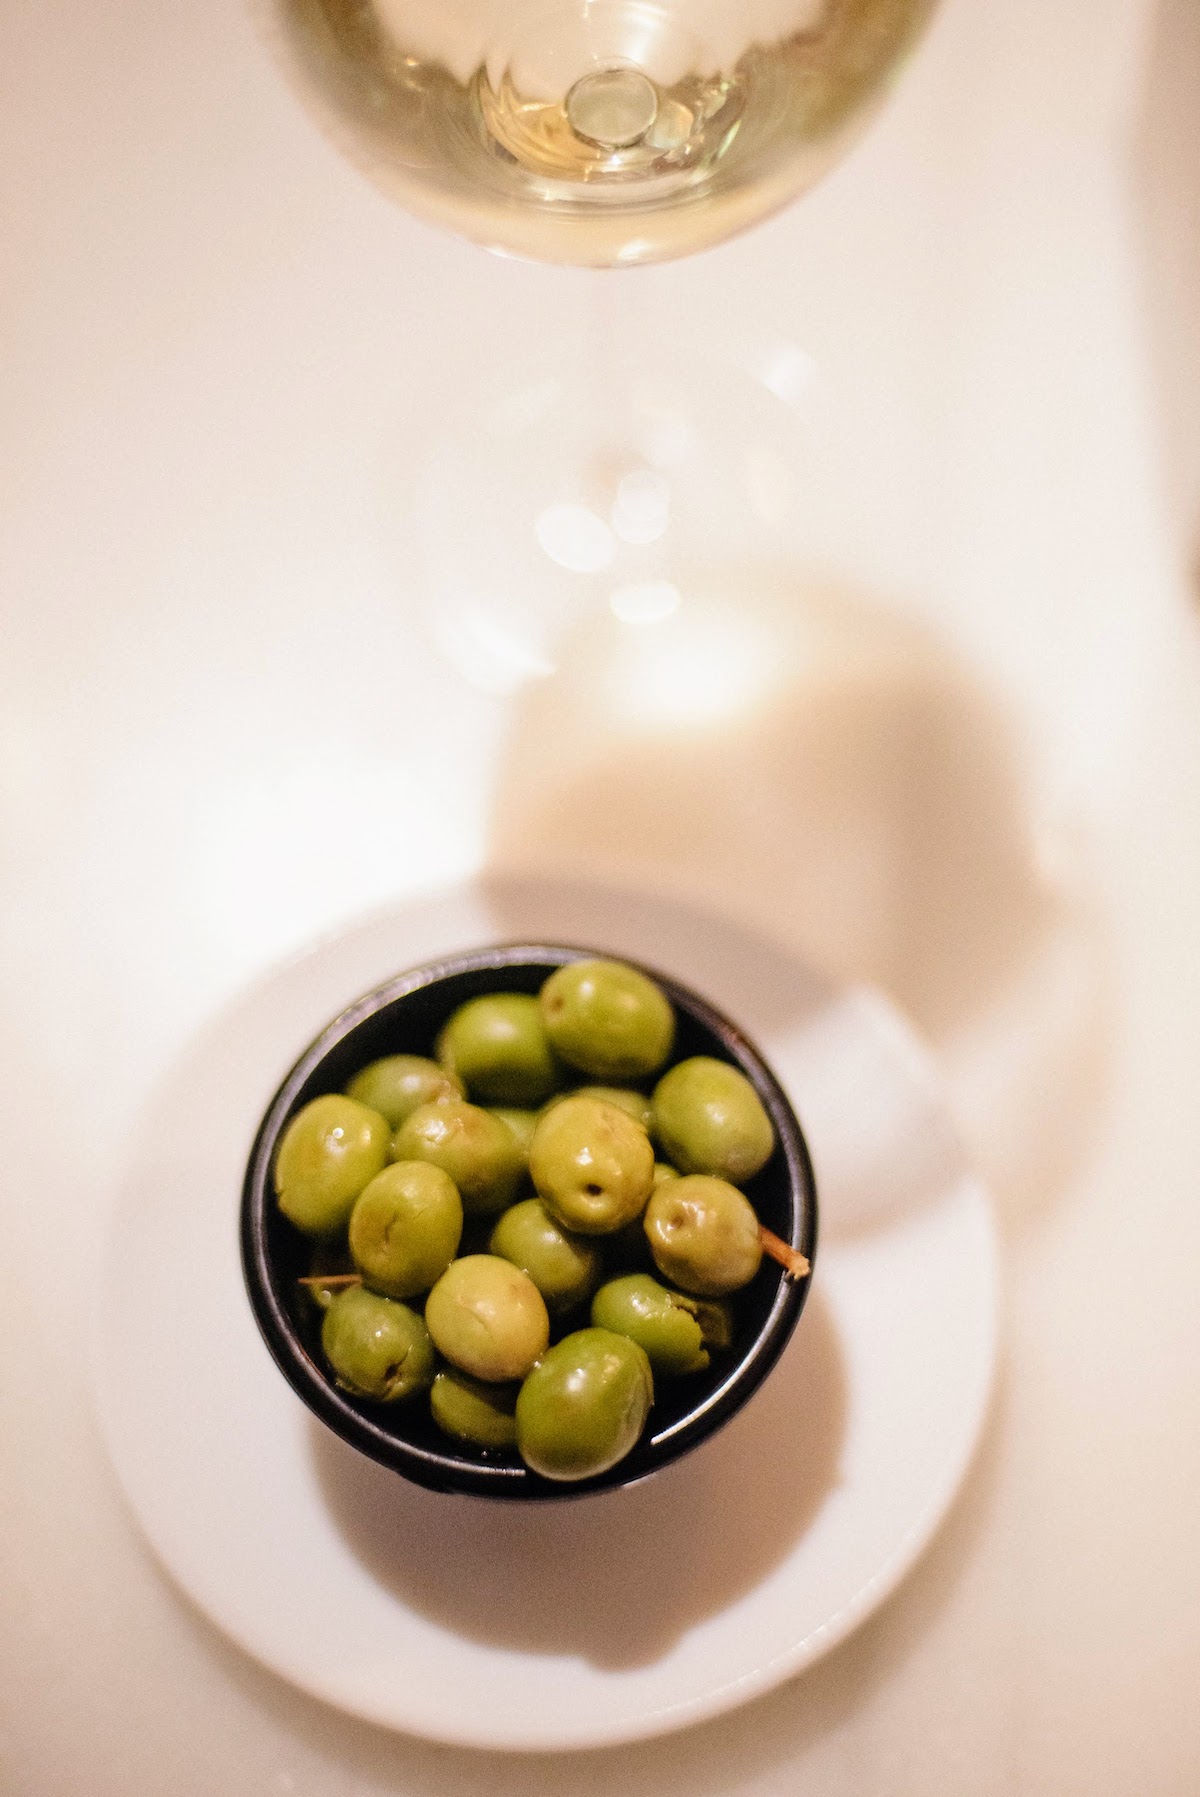 Overhead shot of a small dish of green olives on a white tabletop, with a glass of white wine partially visible behind it.